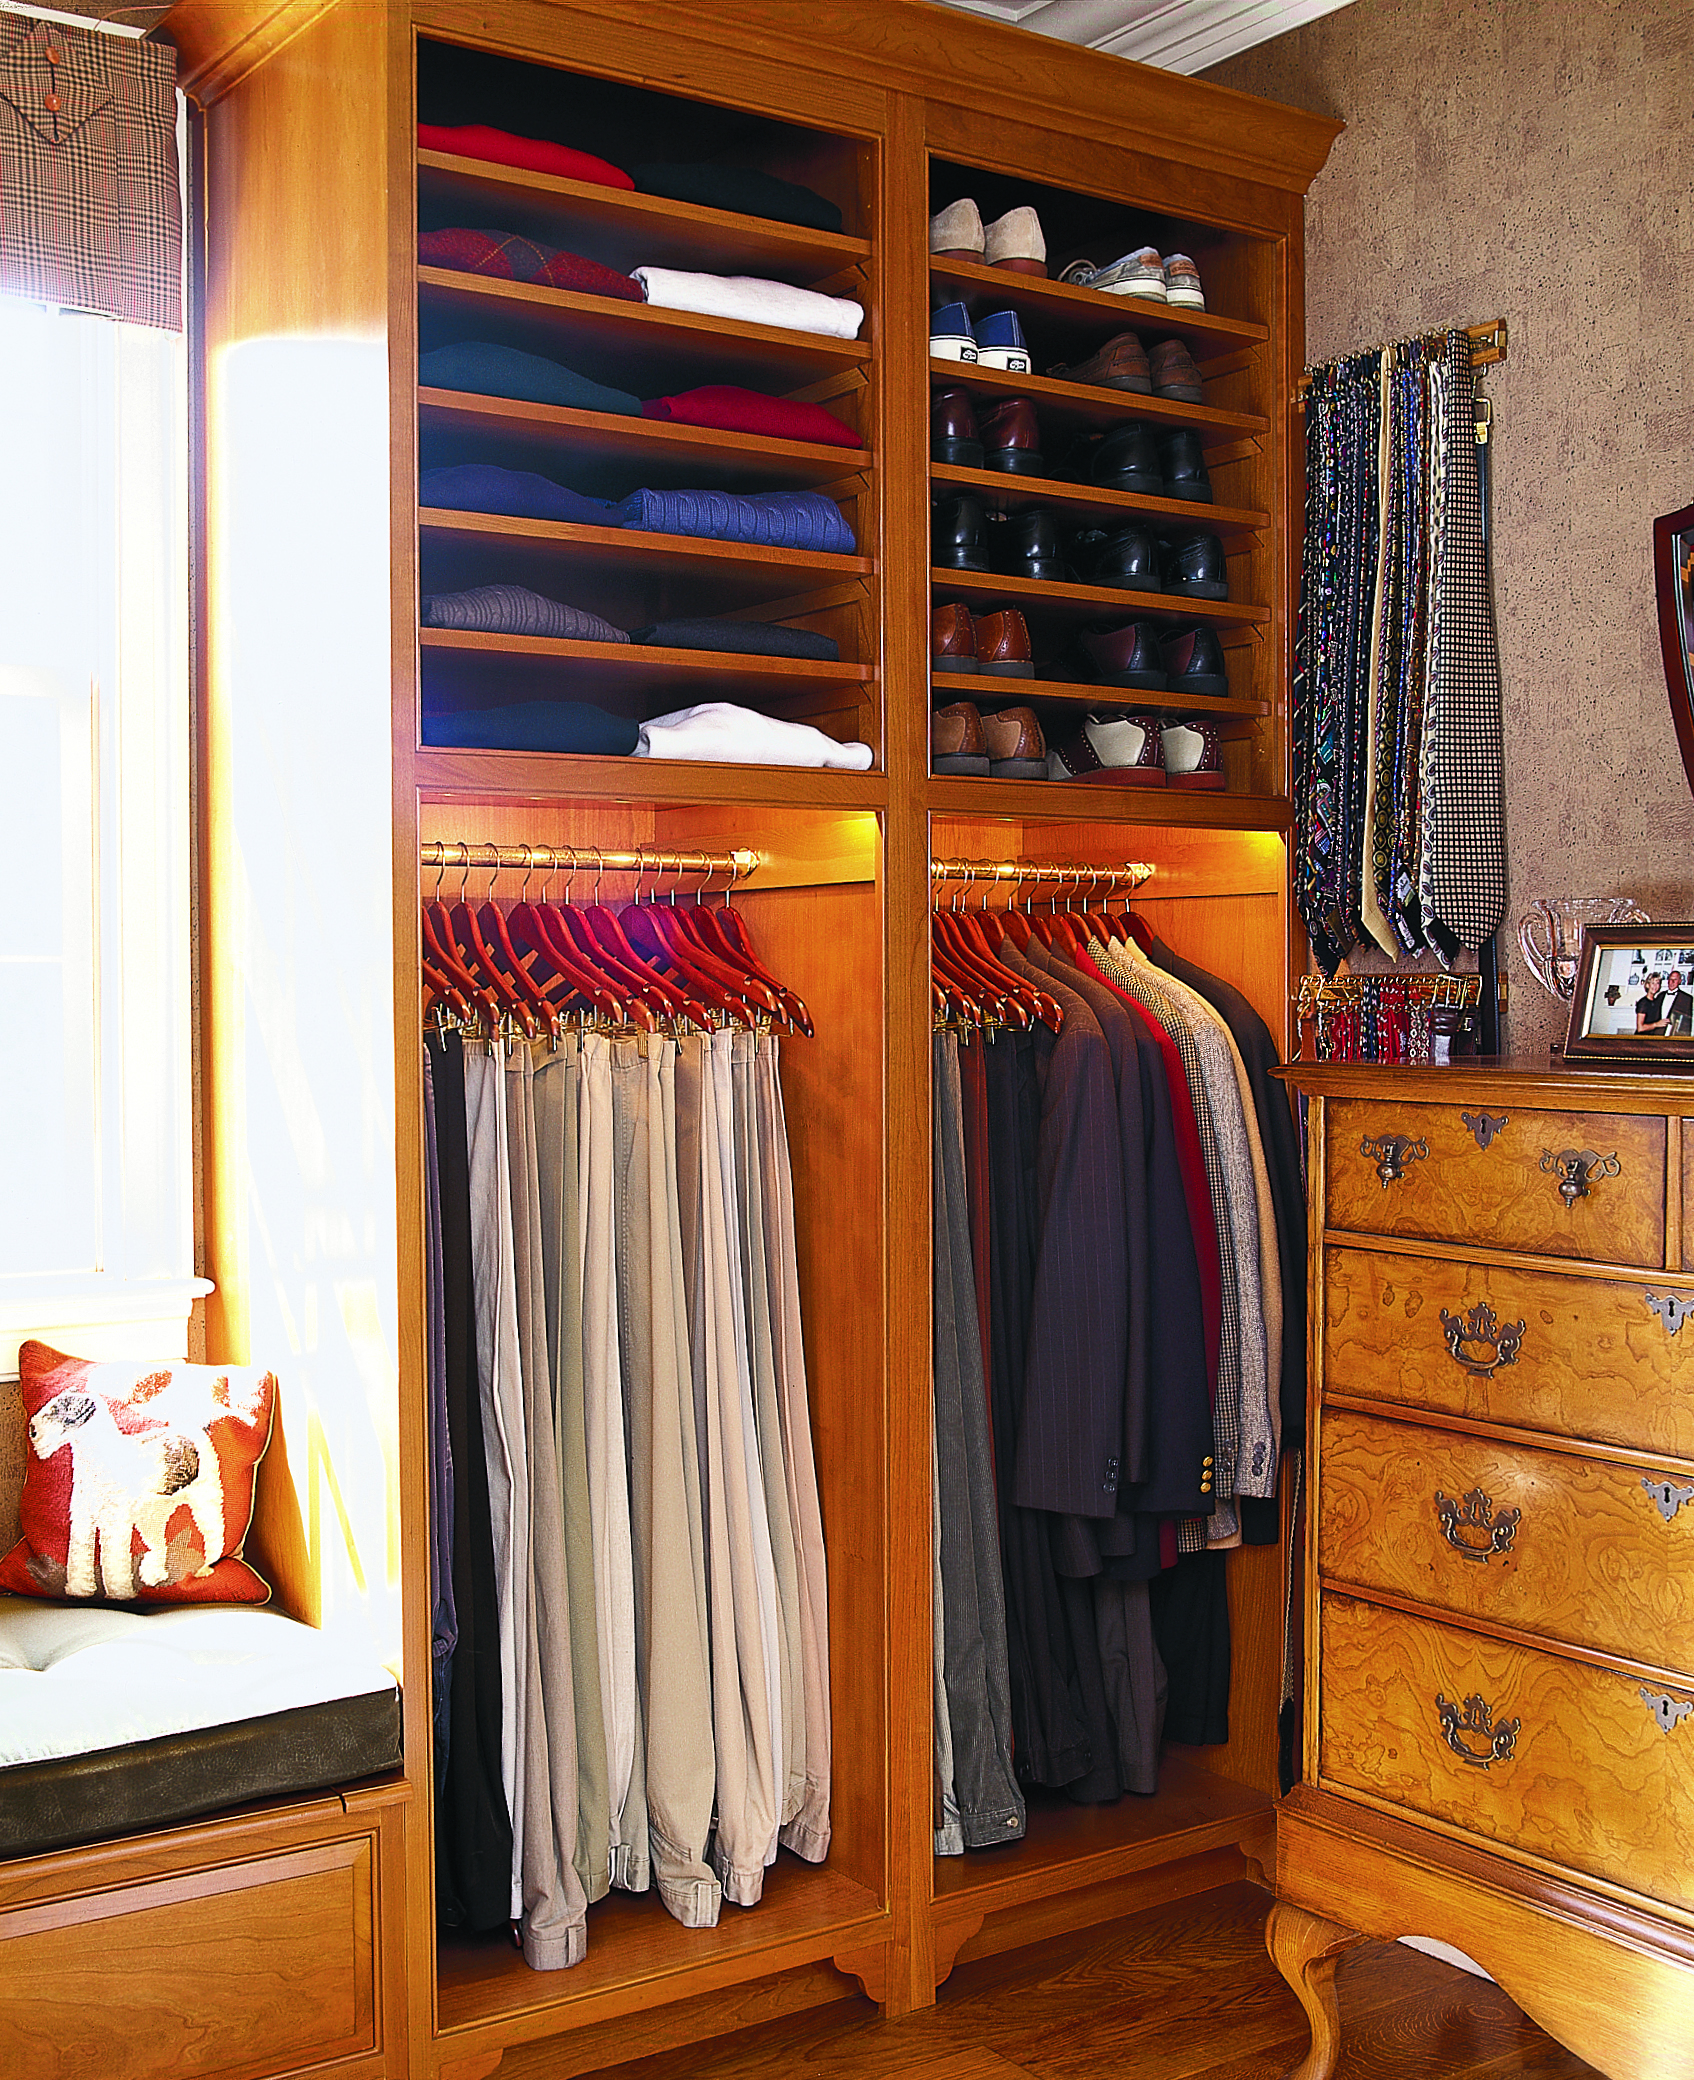 A closet design that has two hanging sections and then shelves above it for shoes and folded clothes.